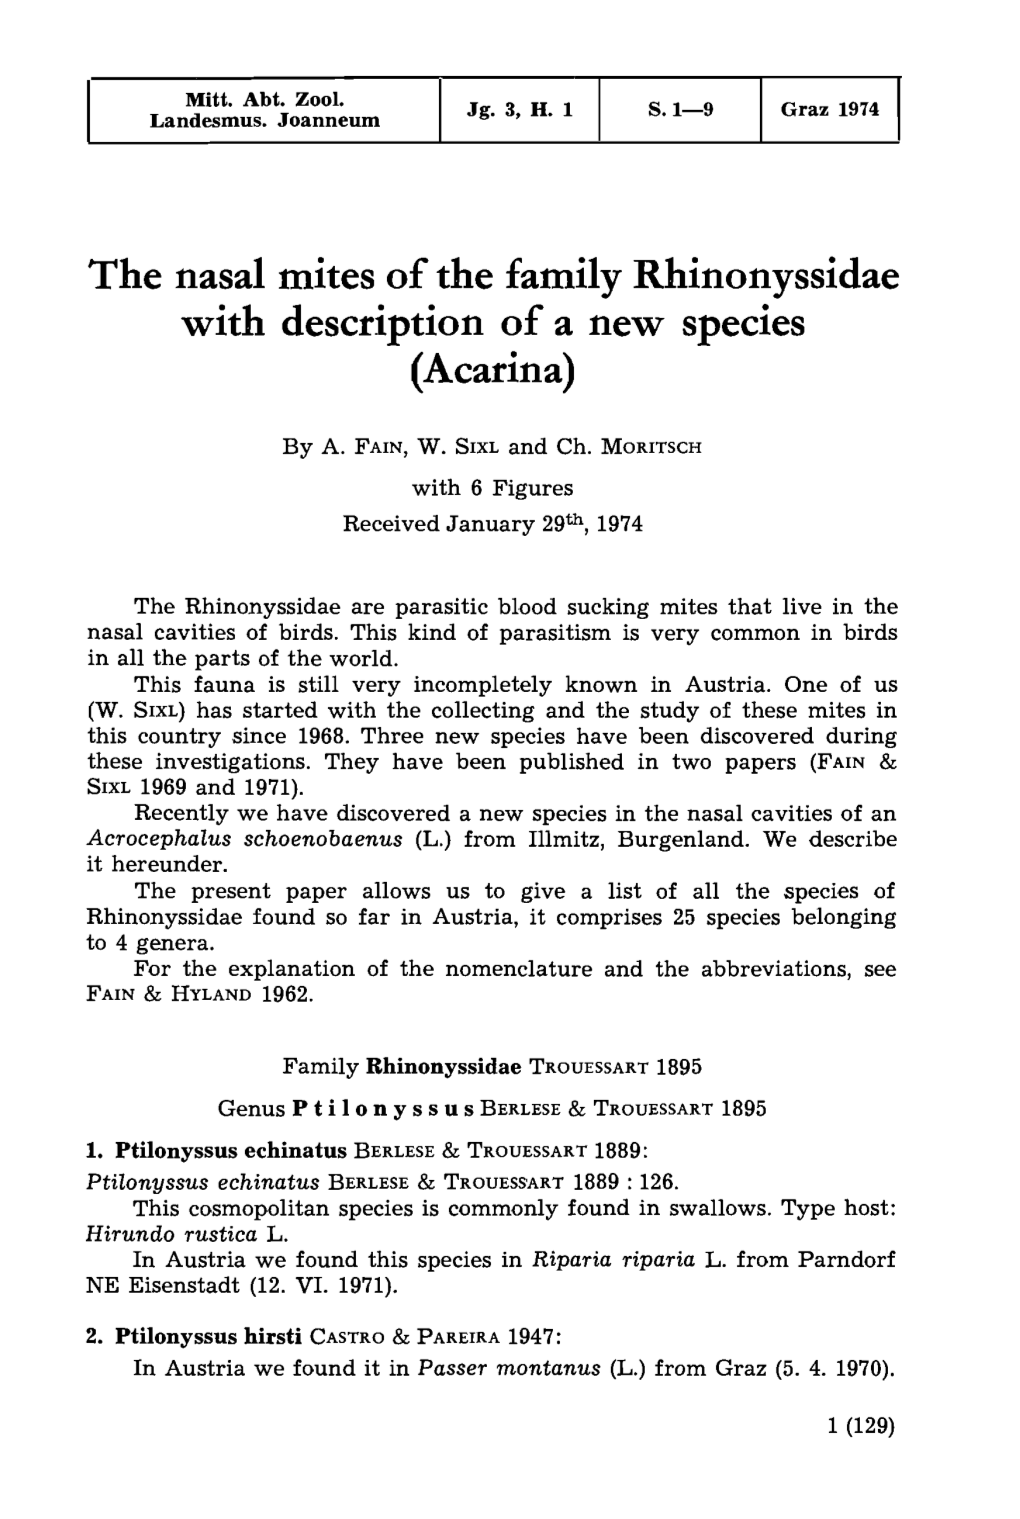 The Nasal Mites of the Family Rhinonyssidae with Description of a New Species (Acarina)